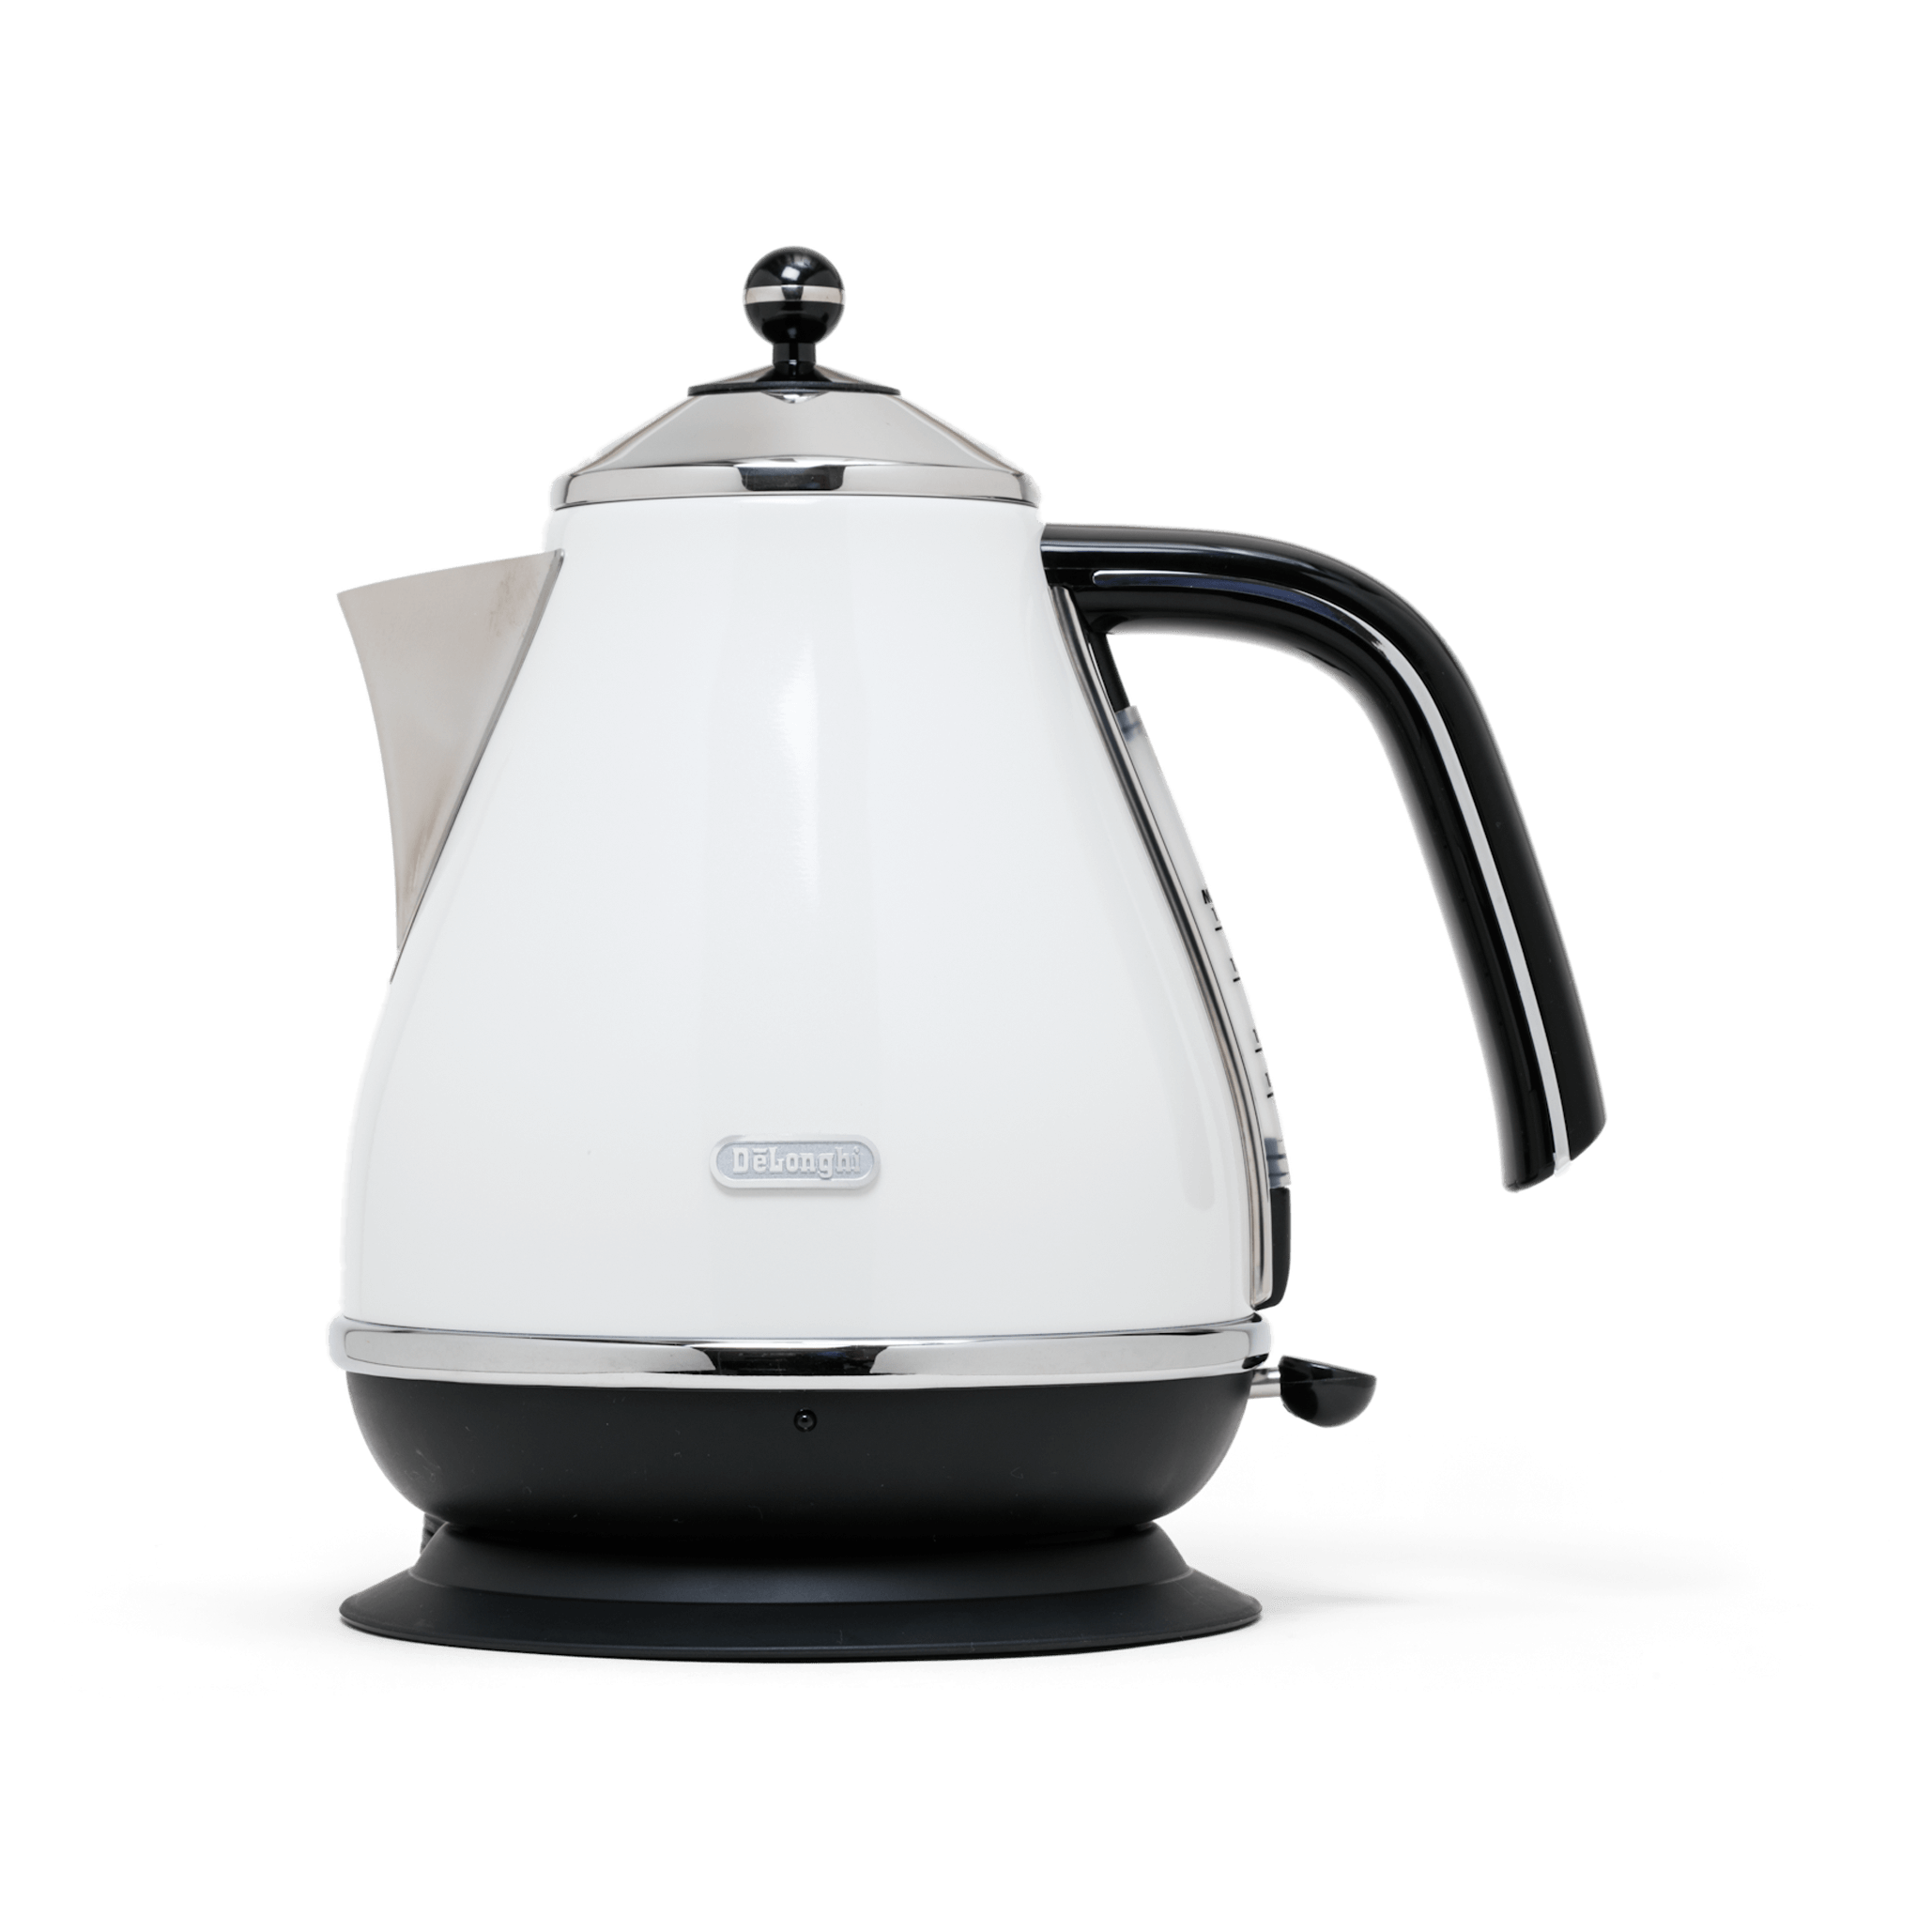 https://res.cloudinary.com/hksqkdlah/image/upload/31612_sil-electric-kettle-delonghi-electric-kettle-kbo1401w.png